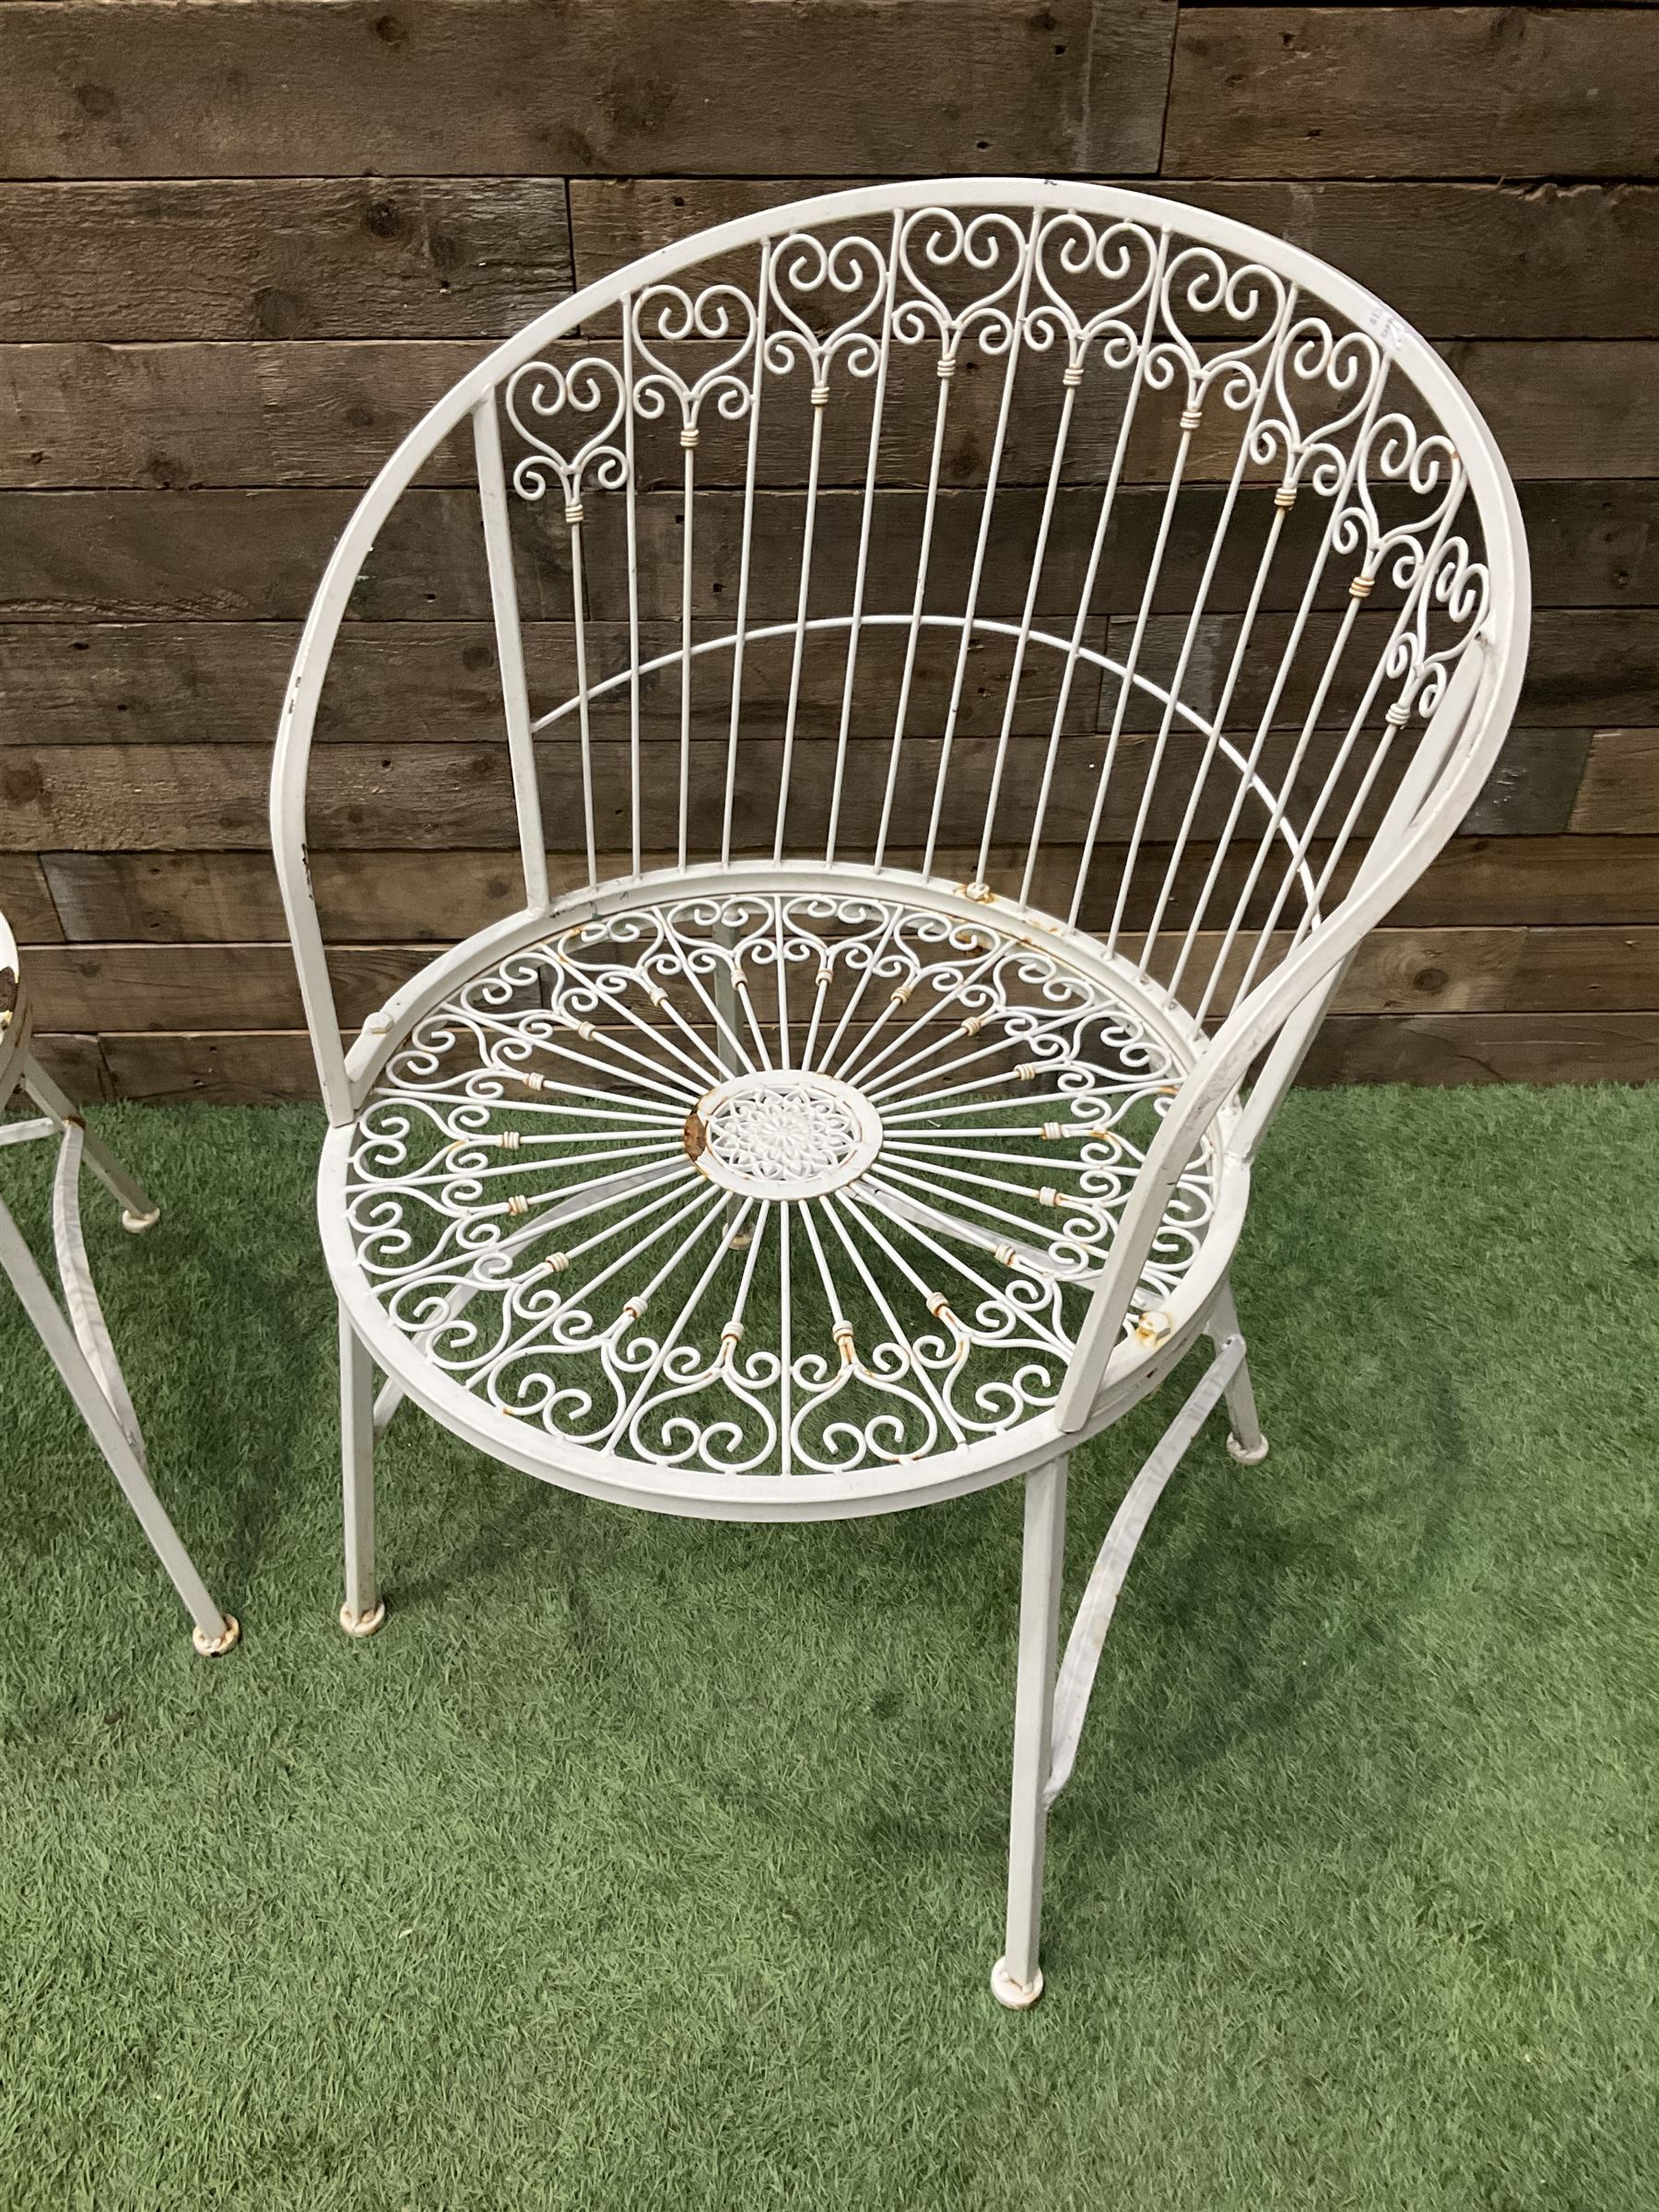 Pair of wrought metal white painted wirework garden chairs - Image 2 of 3